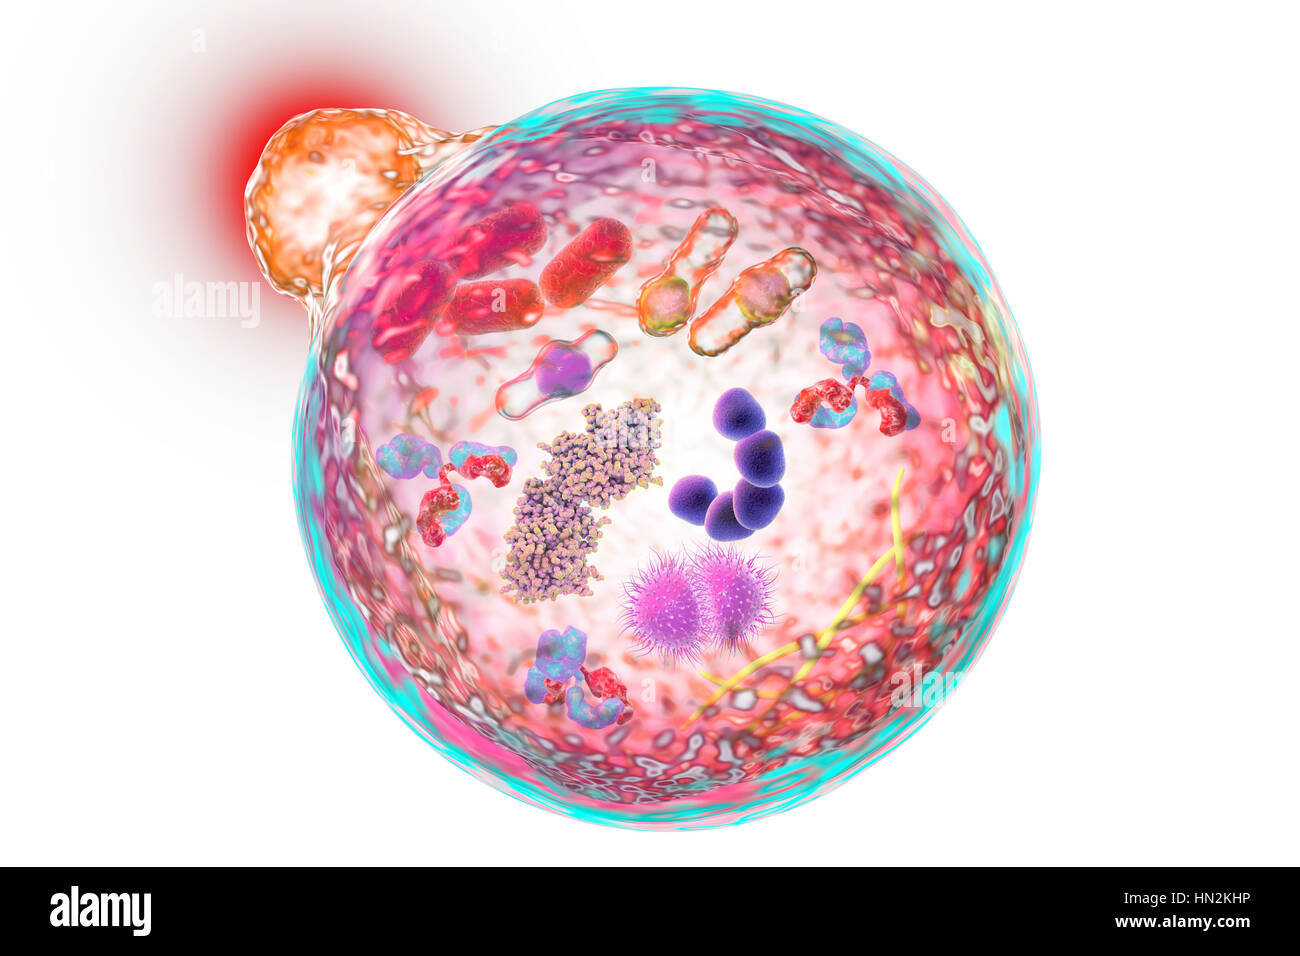 Autophagy. Computer illustration of a lysosome (orange) fusing with an autophagosome (large sphere). Autophagy (autophagocytosis) is the natural mechanism that destroys unnecessary or dysfunctional cellular components and recycles their materials. The target components are first isolated from the rest of the cell within the double-membraned autophagosome. This then fuses with a lysosome, the contents of which degrade the target components. The 2016 Nobel Prize in Physiology or Medicine was awarded to Japanese cell biologist Yoshinori Ohsumi for his discoveries of mechanisms for autophagy. Stock Photo